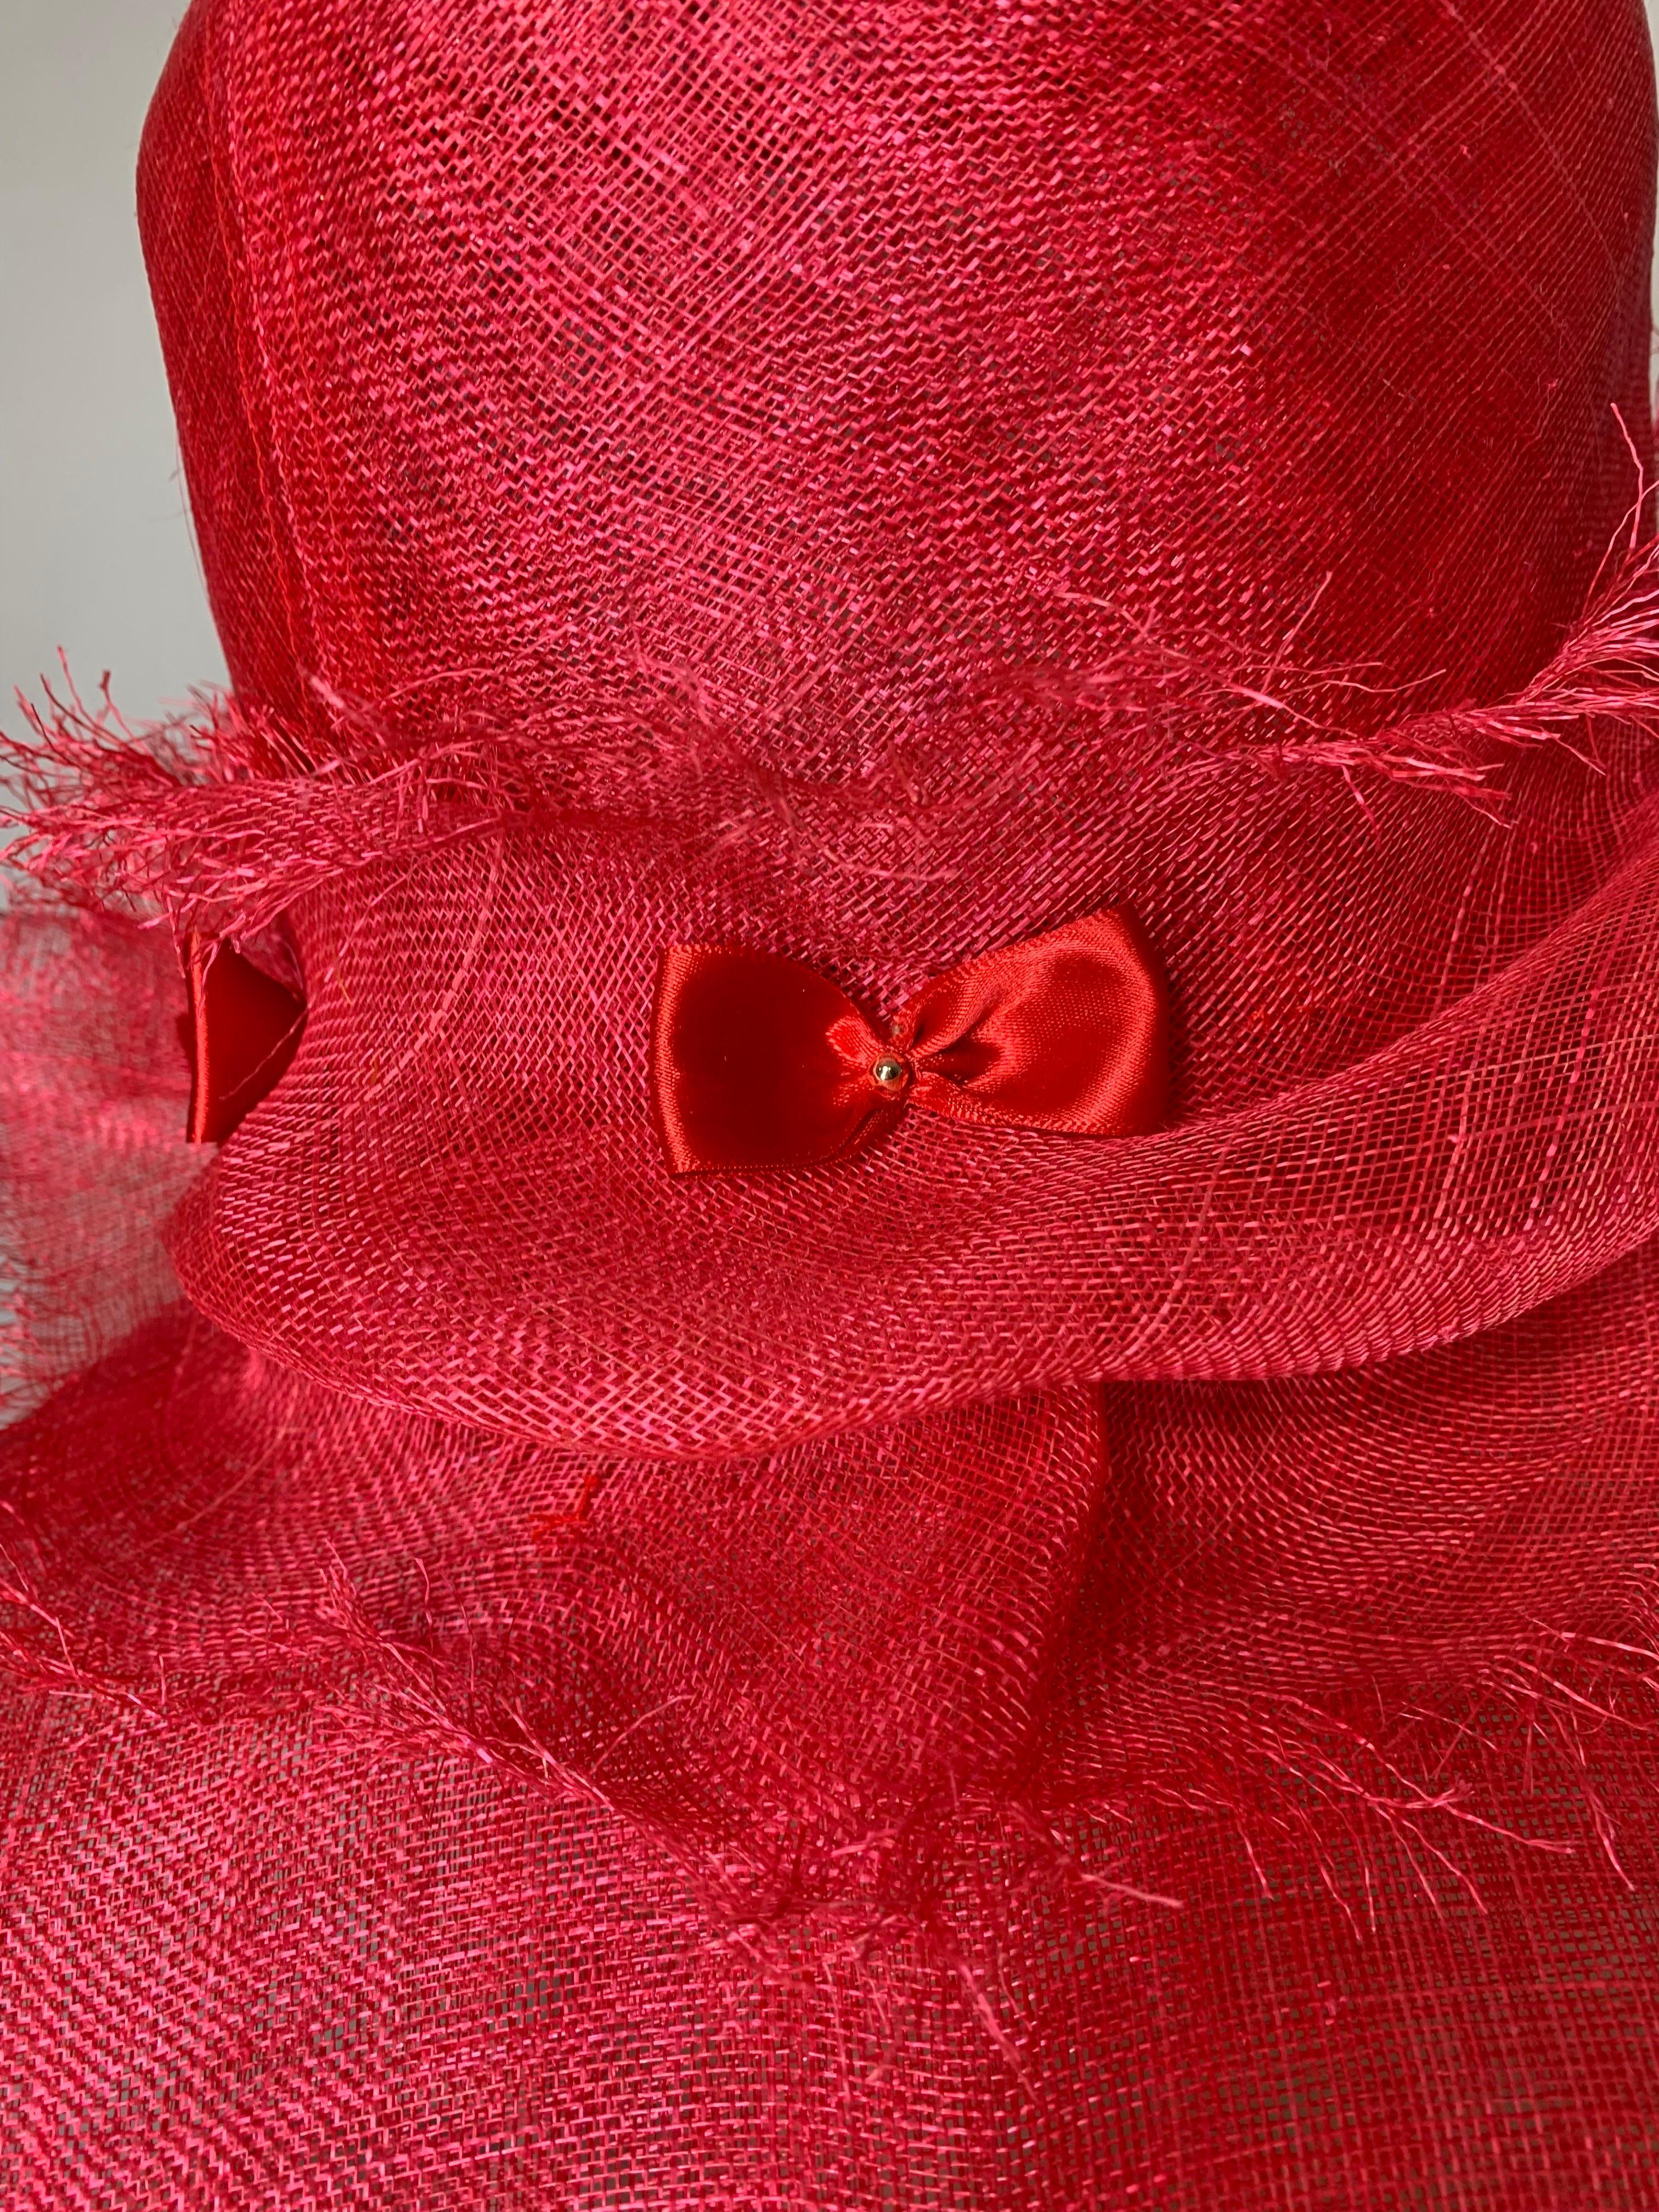 Maison Michel Cardinal Red Sheer Straw Wide Brim Tall Crown Hat w Satin Bows For Sale 5